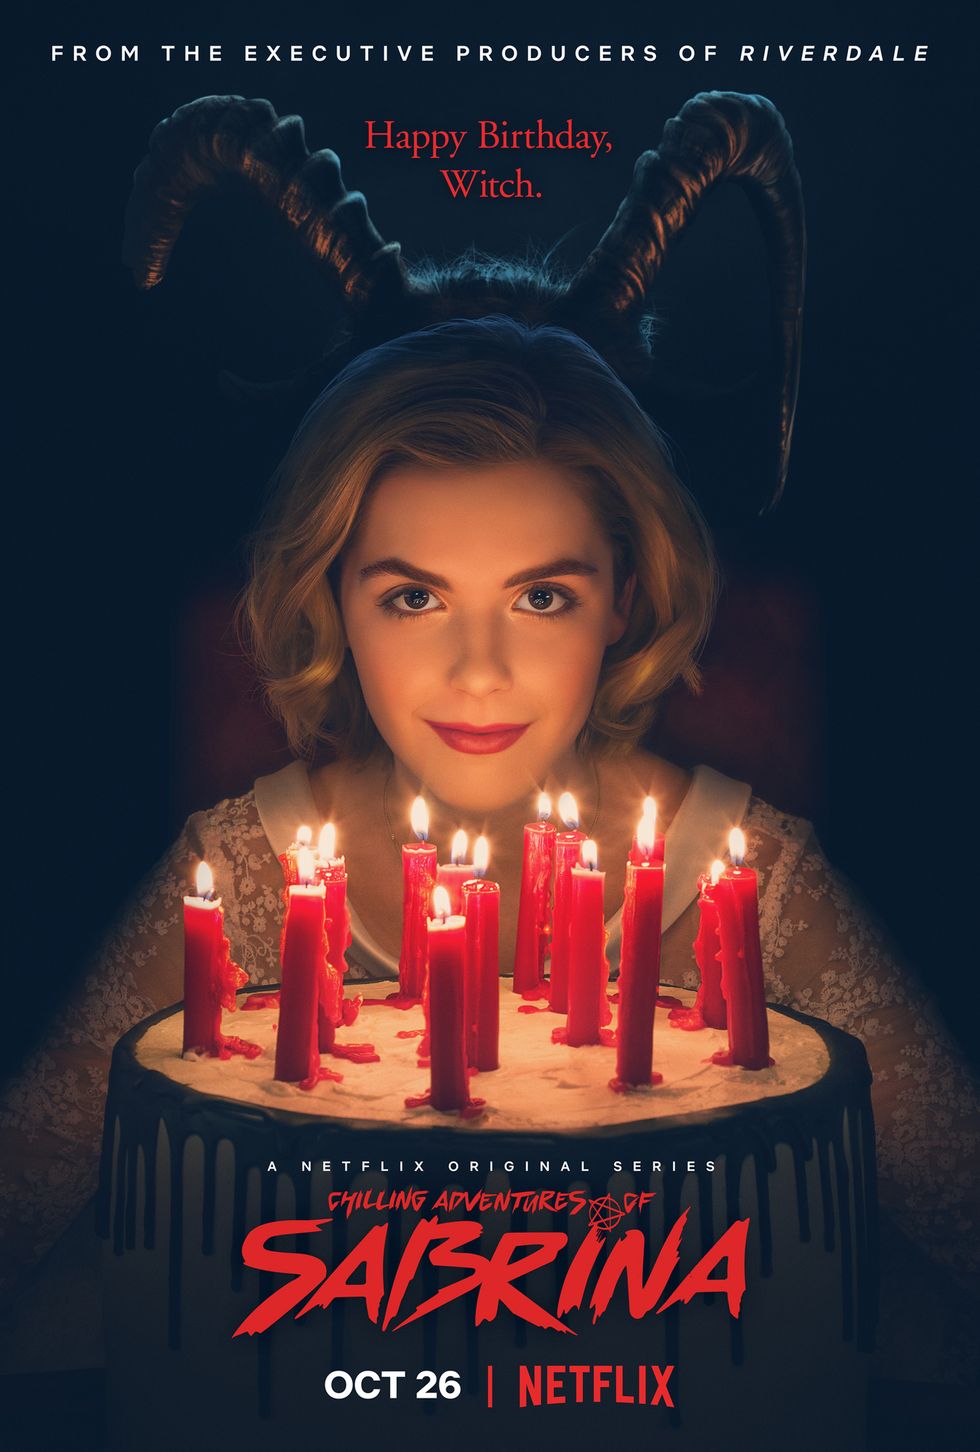 Add 'The Chilling Adventures Of Sabrina' To Your Watchlist Right Now